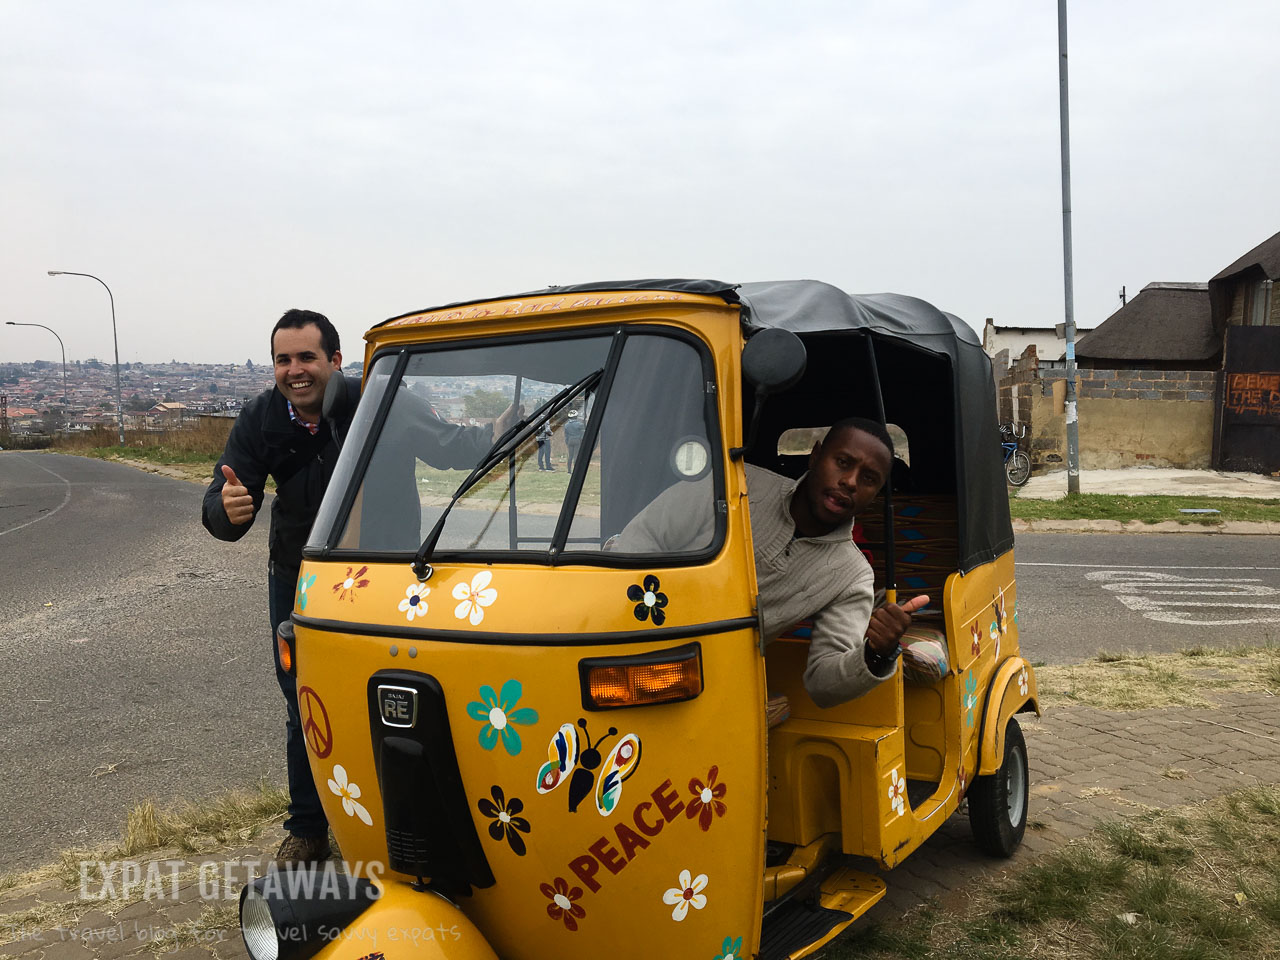 It was great fun zipping around the sights of Soweto on a colourful tuk tuk with our local guide. Expat Getaways Two Weeks in Southern Africa.